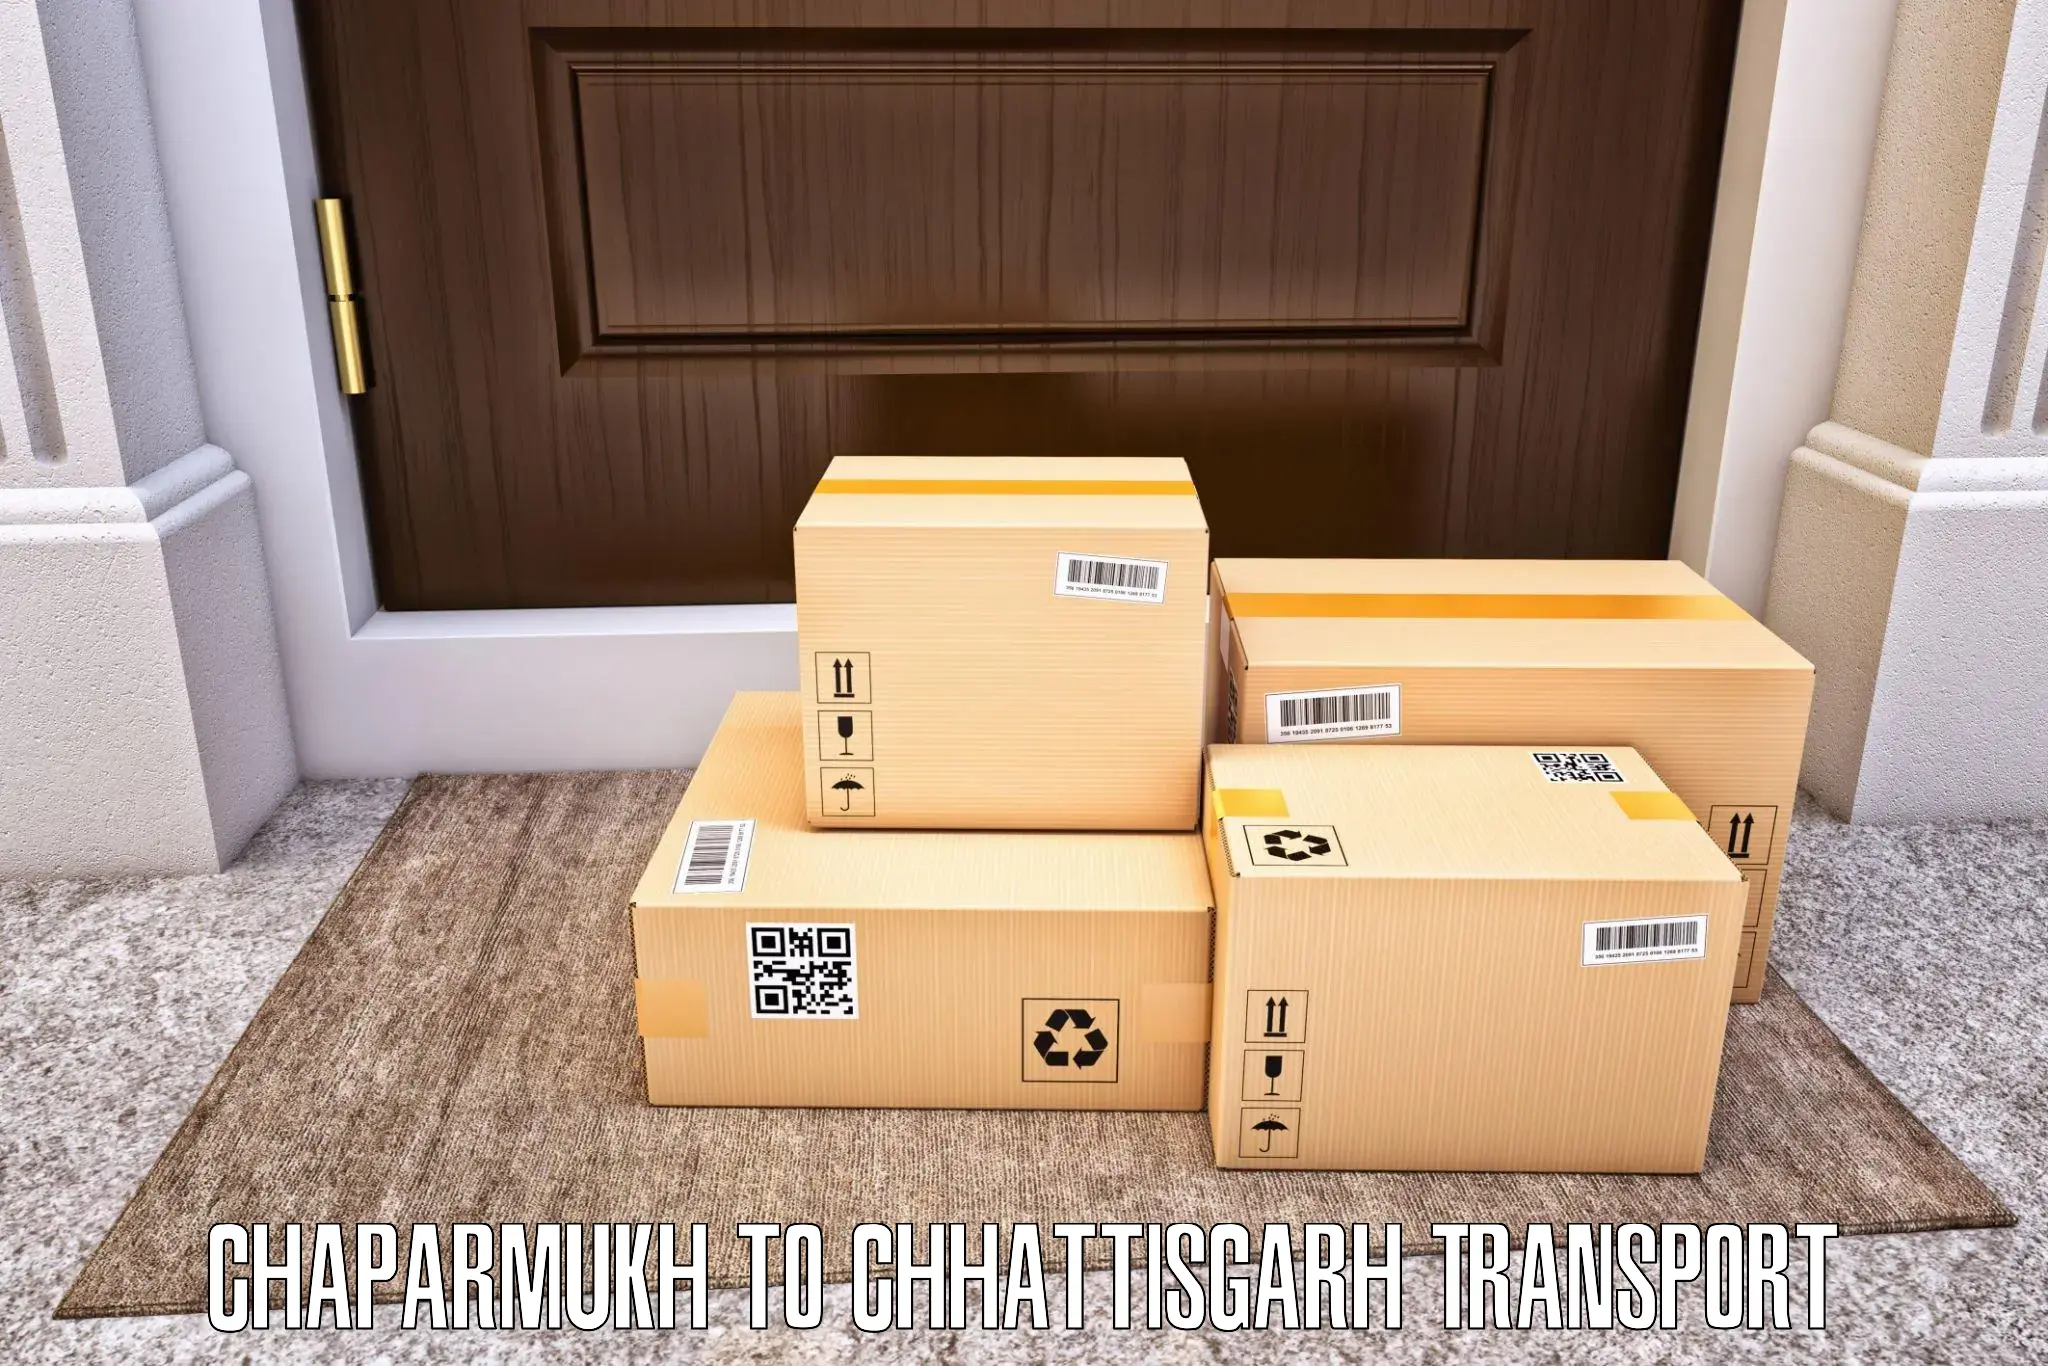 Parcel transport services in Chaparmukh to Charama